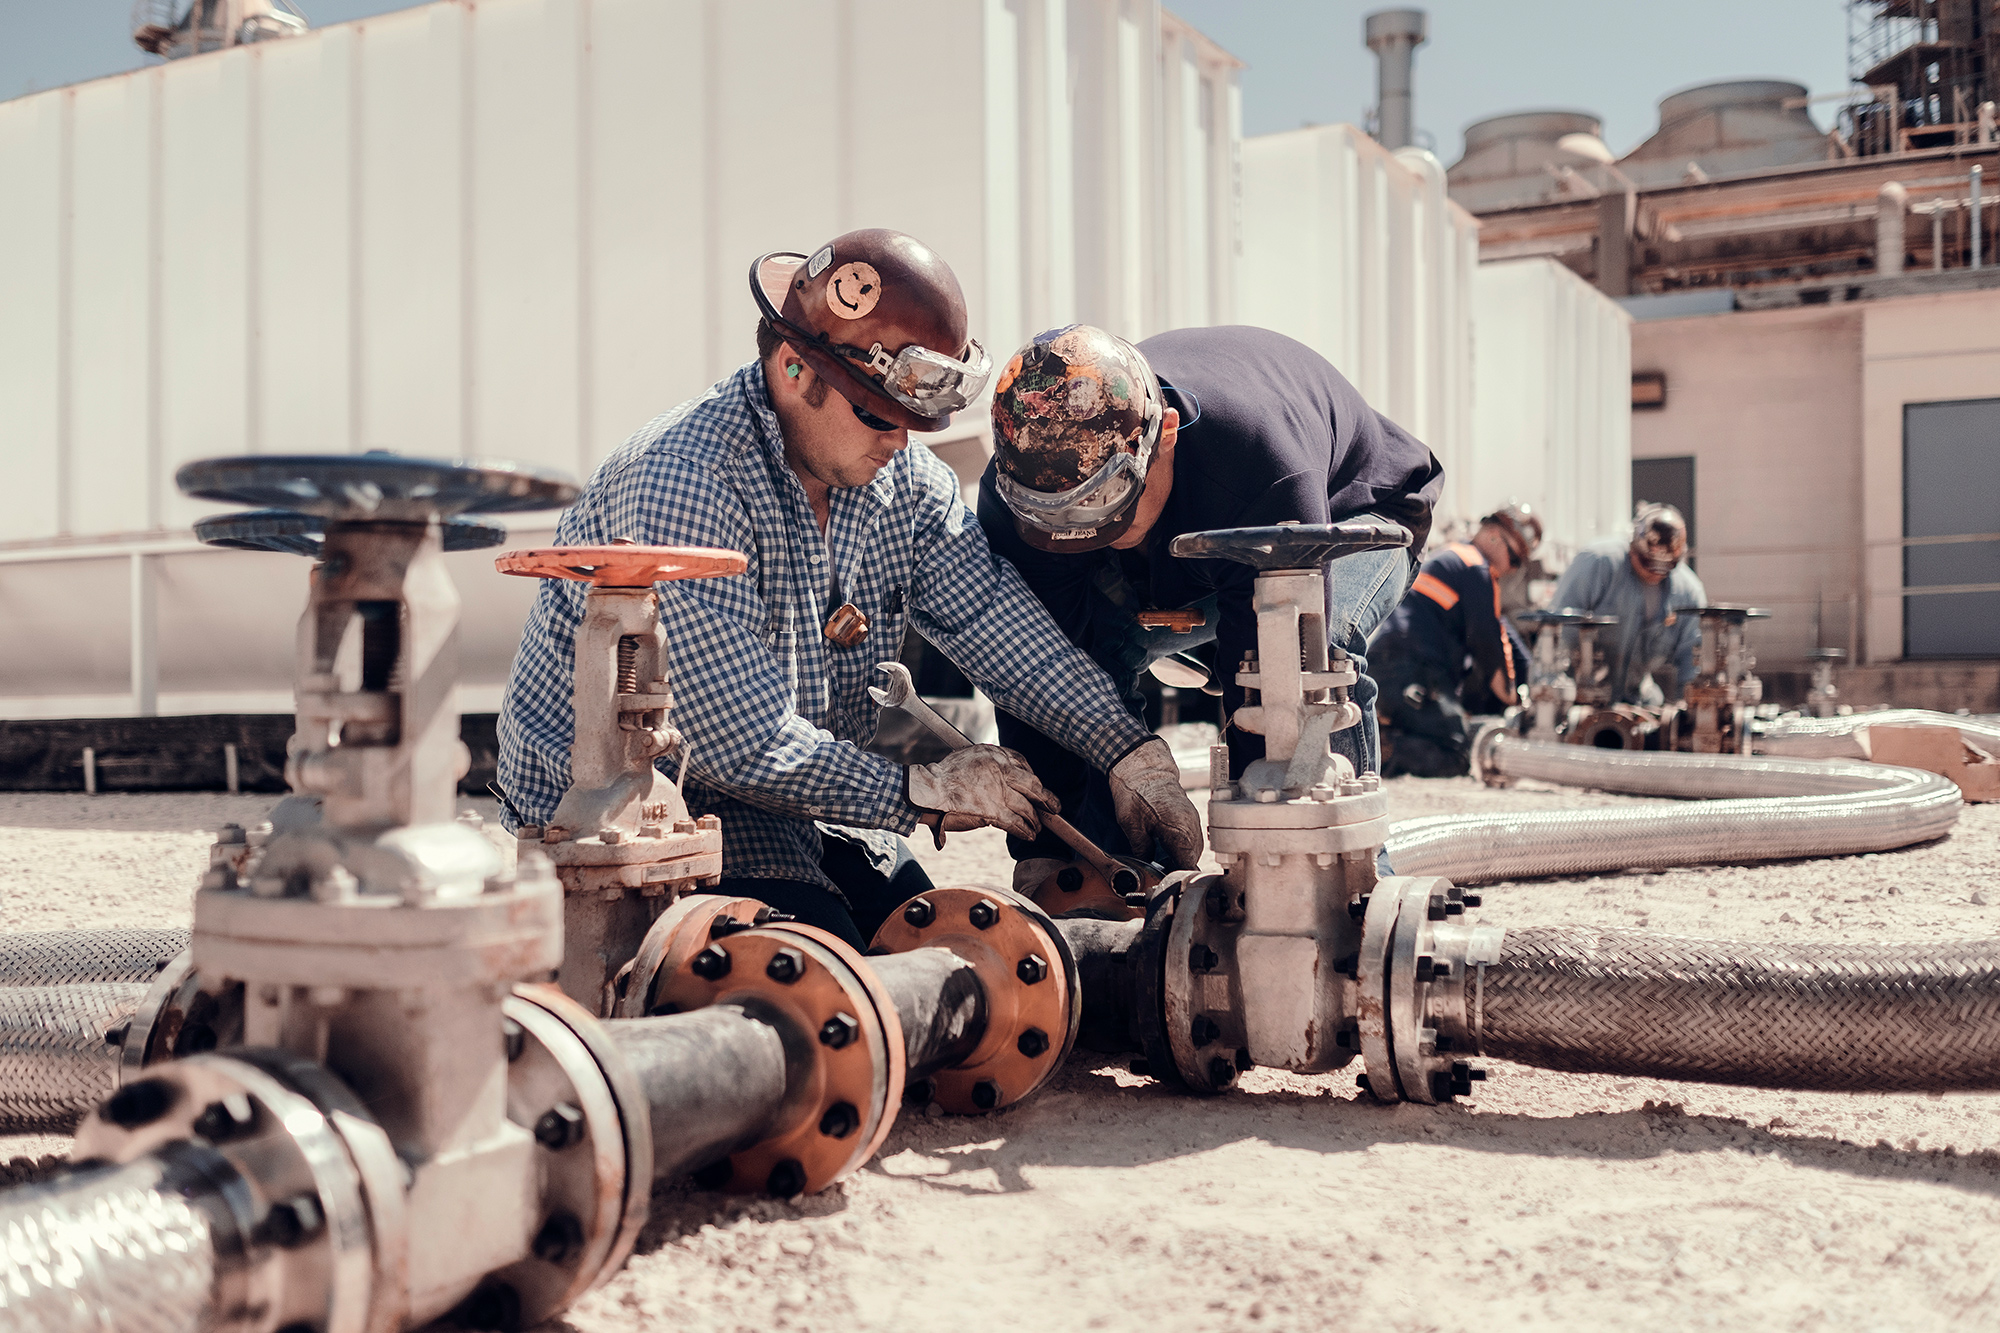 Exxon Mobil refinery operations team at work in an oil refinery, photographed by corporate photographer, Todd Spoth.